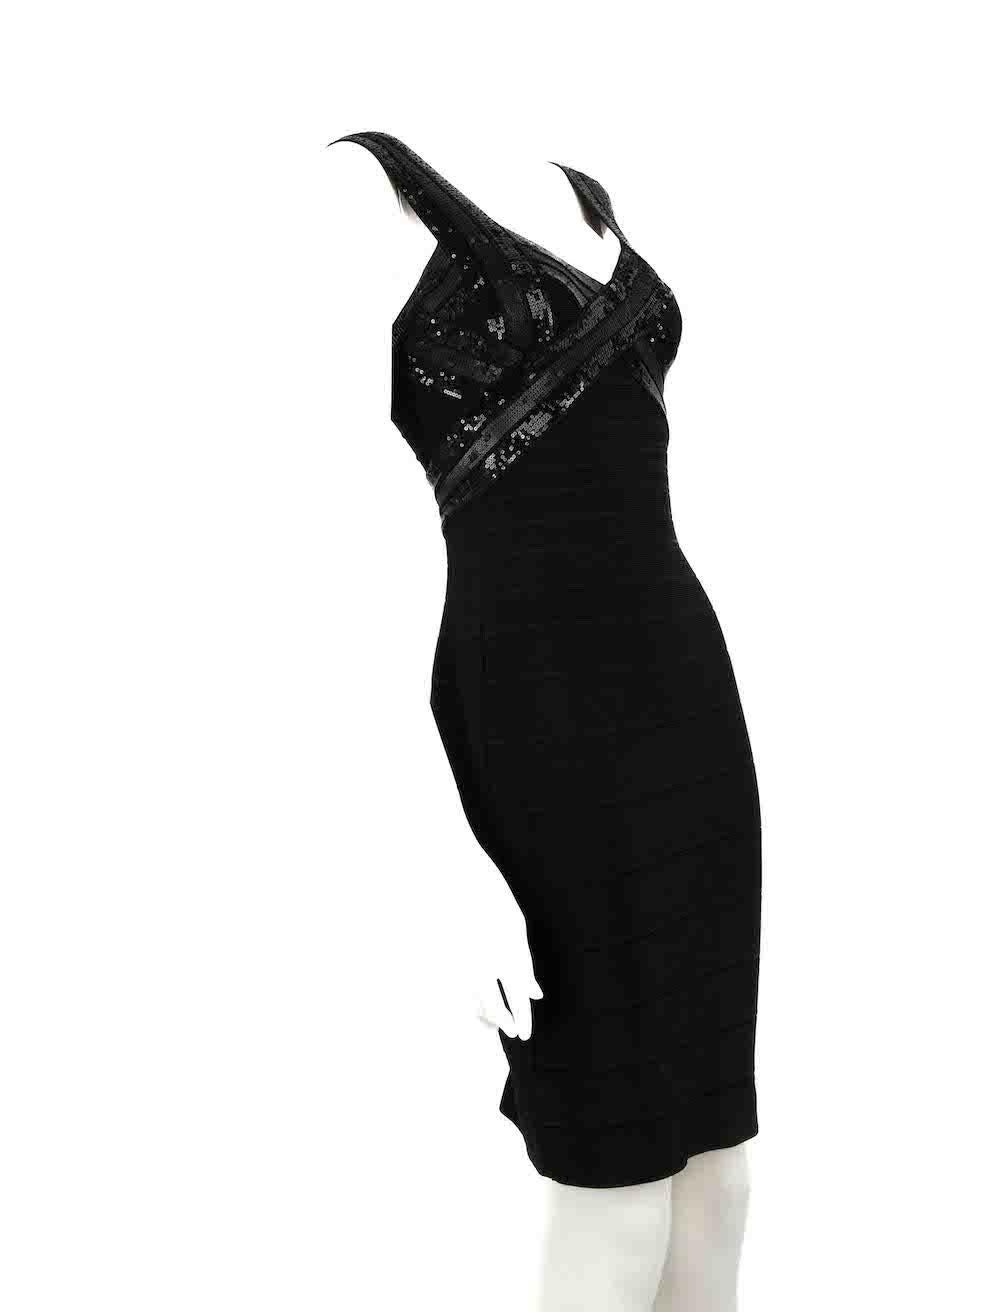 CONDITION is Very good. Hardly any visible wear to dress is evident on this used Herve Leger designer resale item.
 
 
 
 Details
 
 
 Black
 
 Rayon
 
 Dress
 
 Bodycon
 
 Mini
 
 V-neck
 
 Sequinned top
 
 Stretchy
 
 
 
 
 
 Made in China
 
 
 
